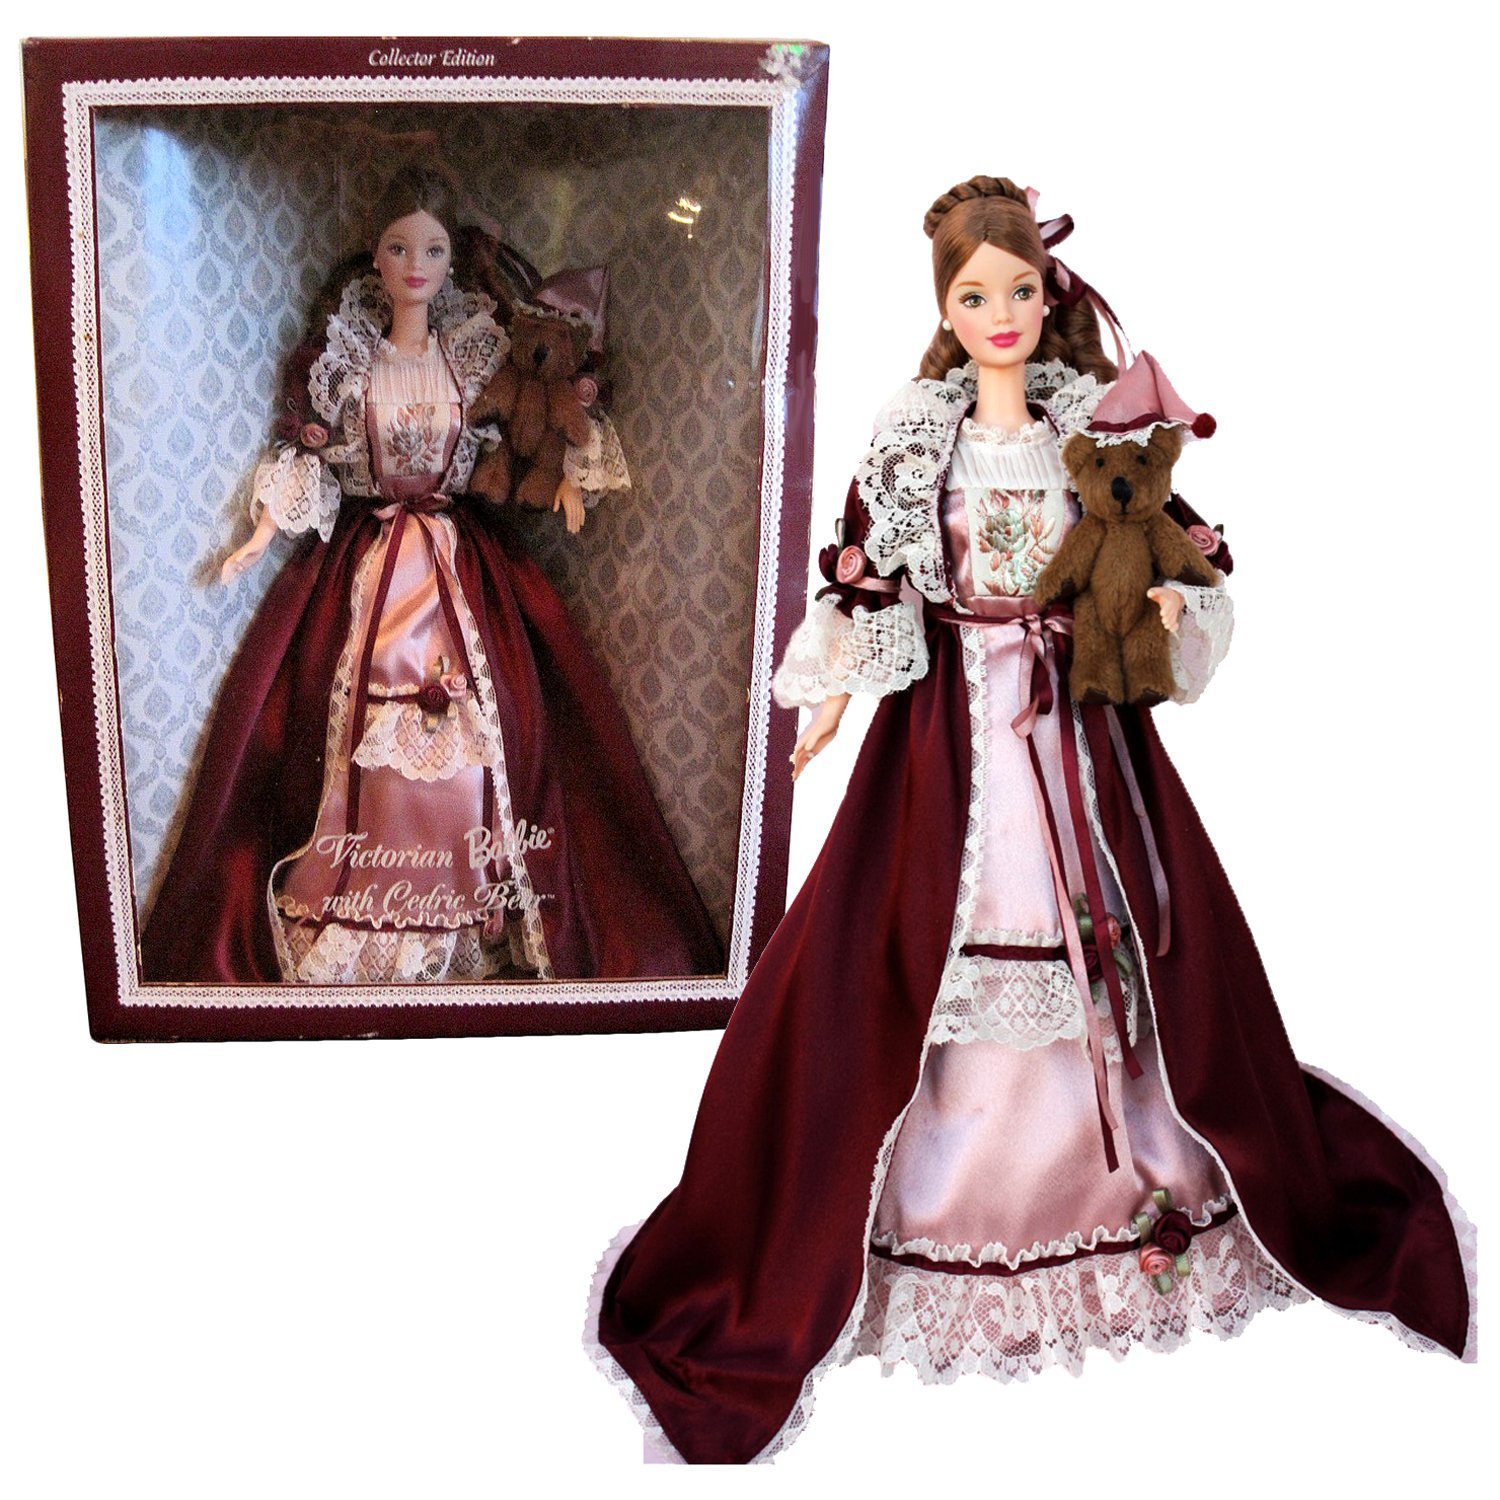 Mattel Year 1999 Barbie Collector Edition 12 Inch Doll Set Victorian Barbie Wi Toys And Hobbies